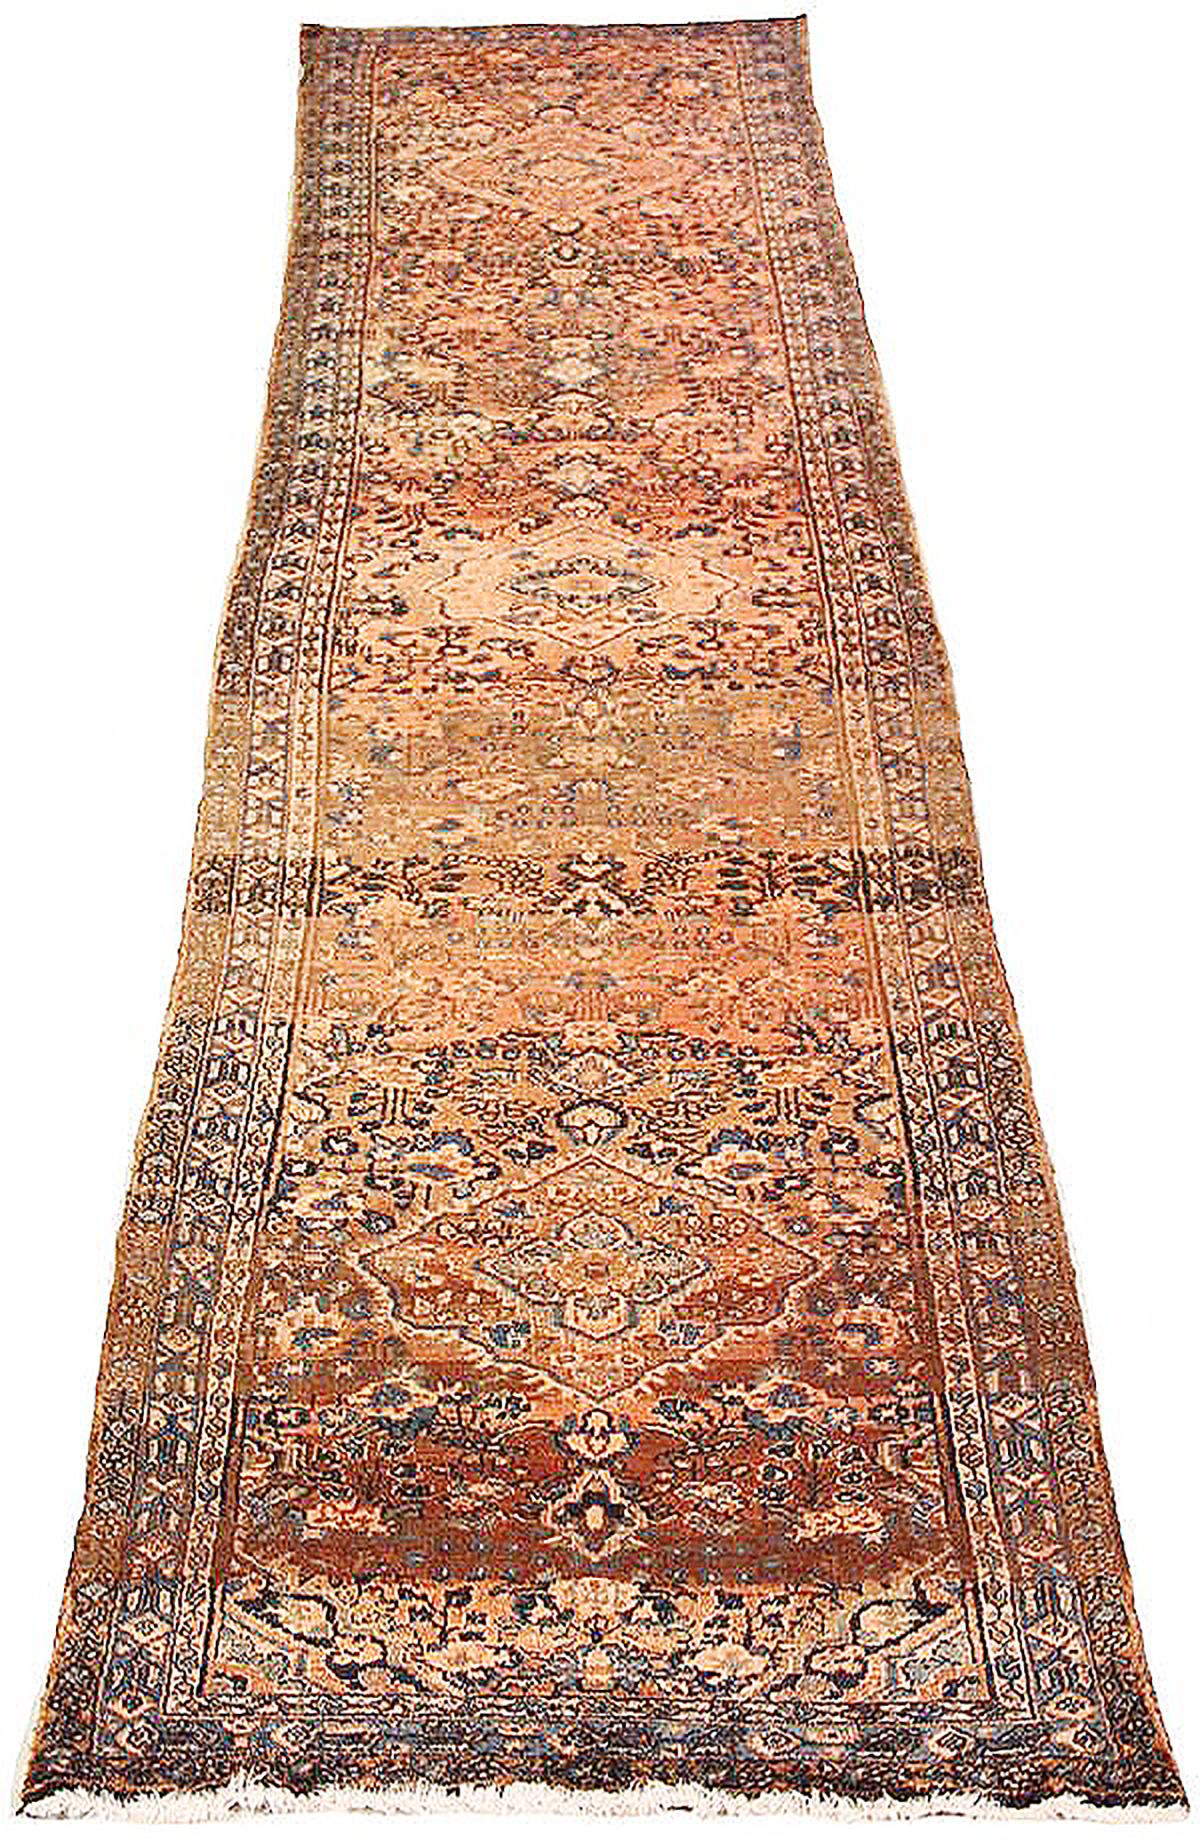 Antique Persian runner rug handwoven from the finest sheep’s wool and colored with all-natural vegetable dyes that are safe for humans and pets. It’s a traditional Malayer design featuring a mixed navy, black and brown combination of floral details